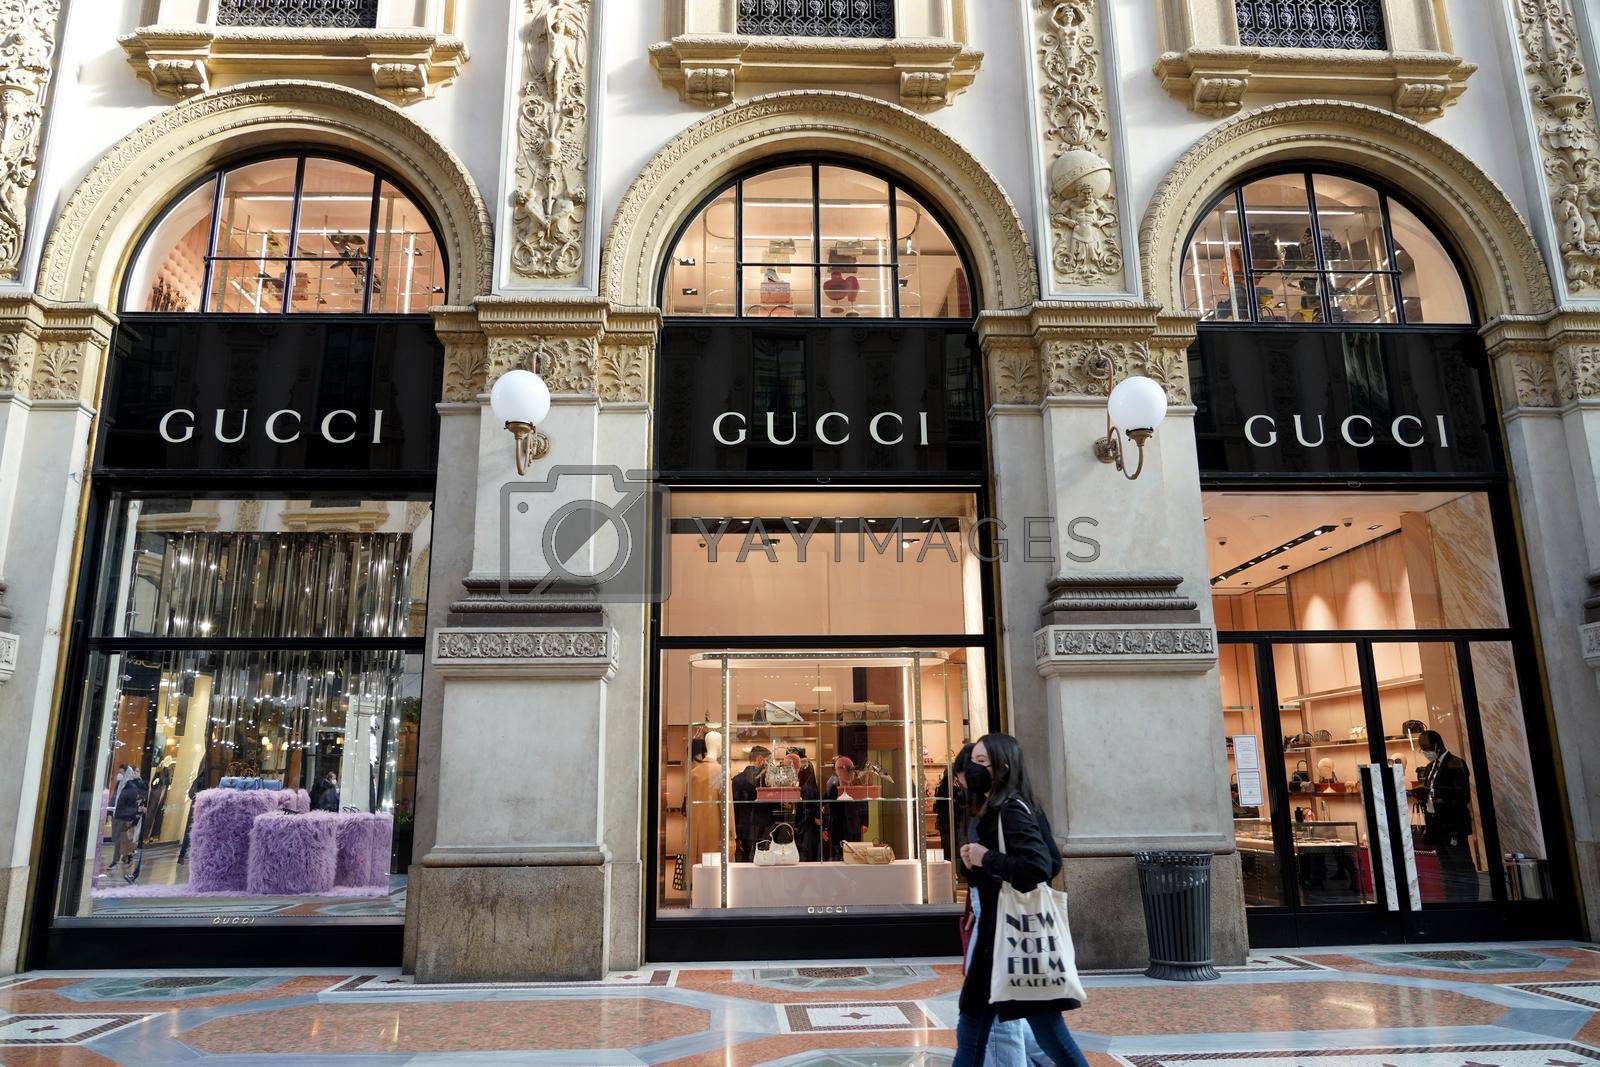 MILAN, ITALY - JANUARY 14, 2022: Facade of GUCCI store inside Galleria Vittorio Emanuele II the world's oldest shopping mall, Milan, Italy